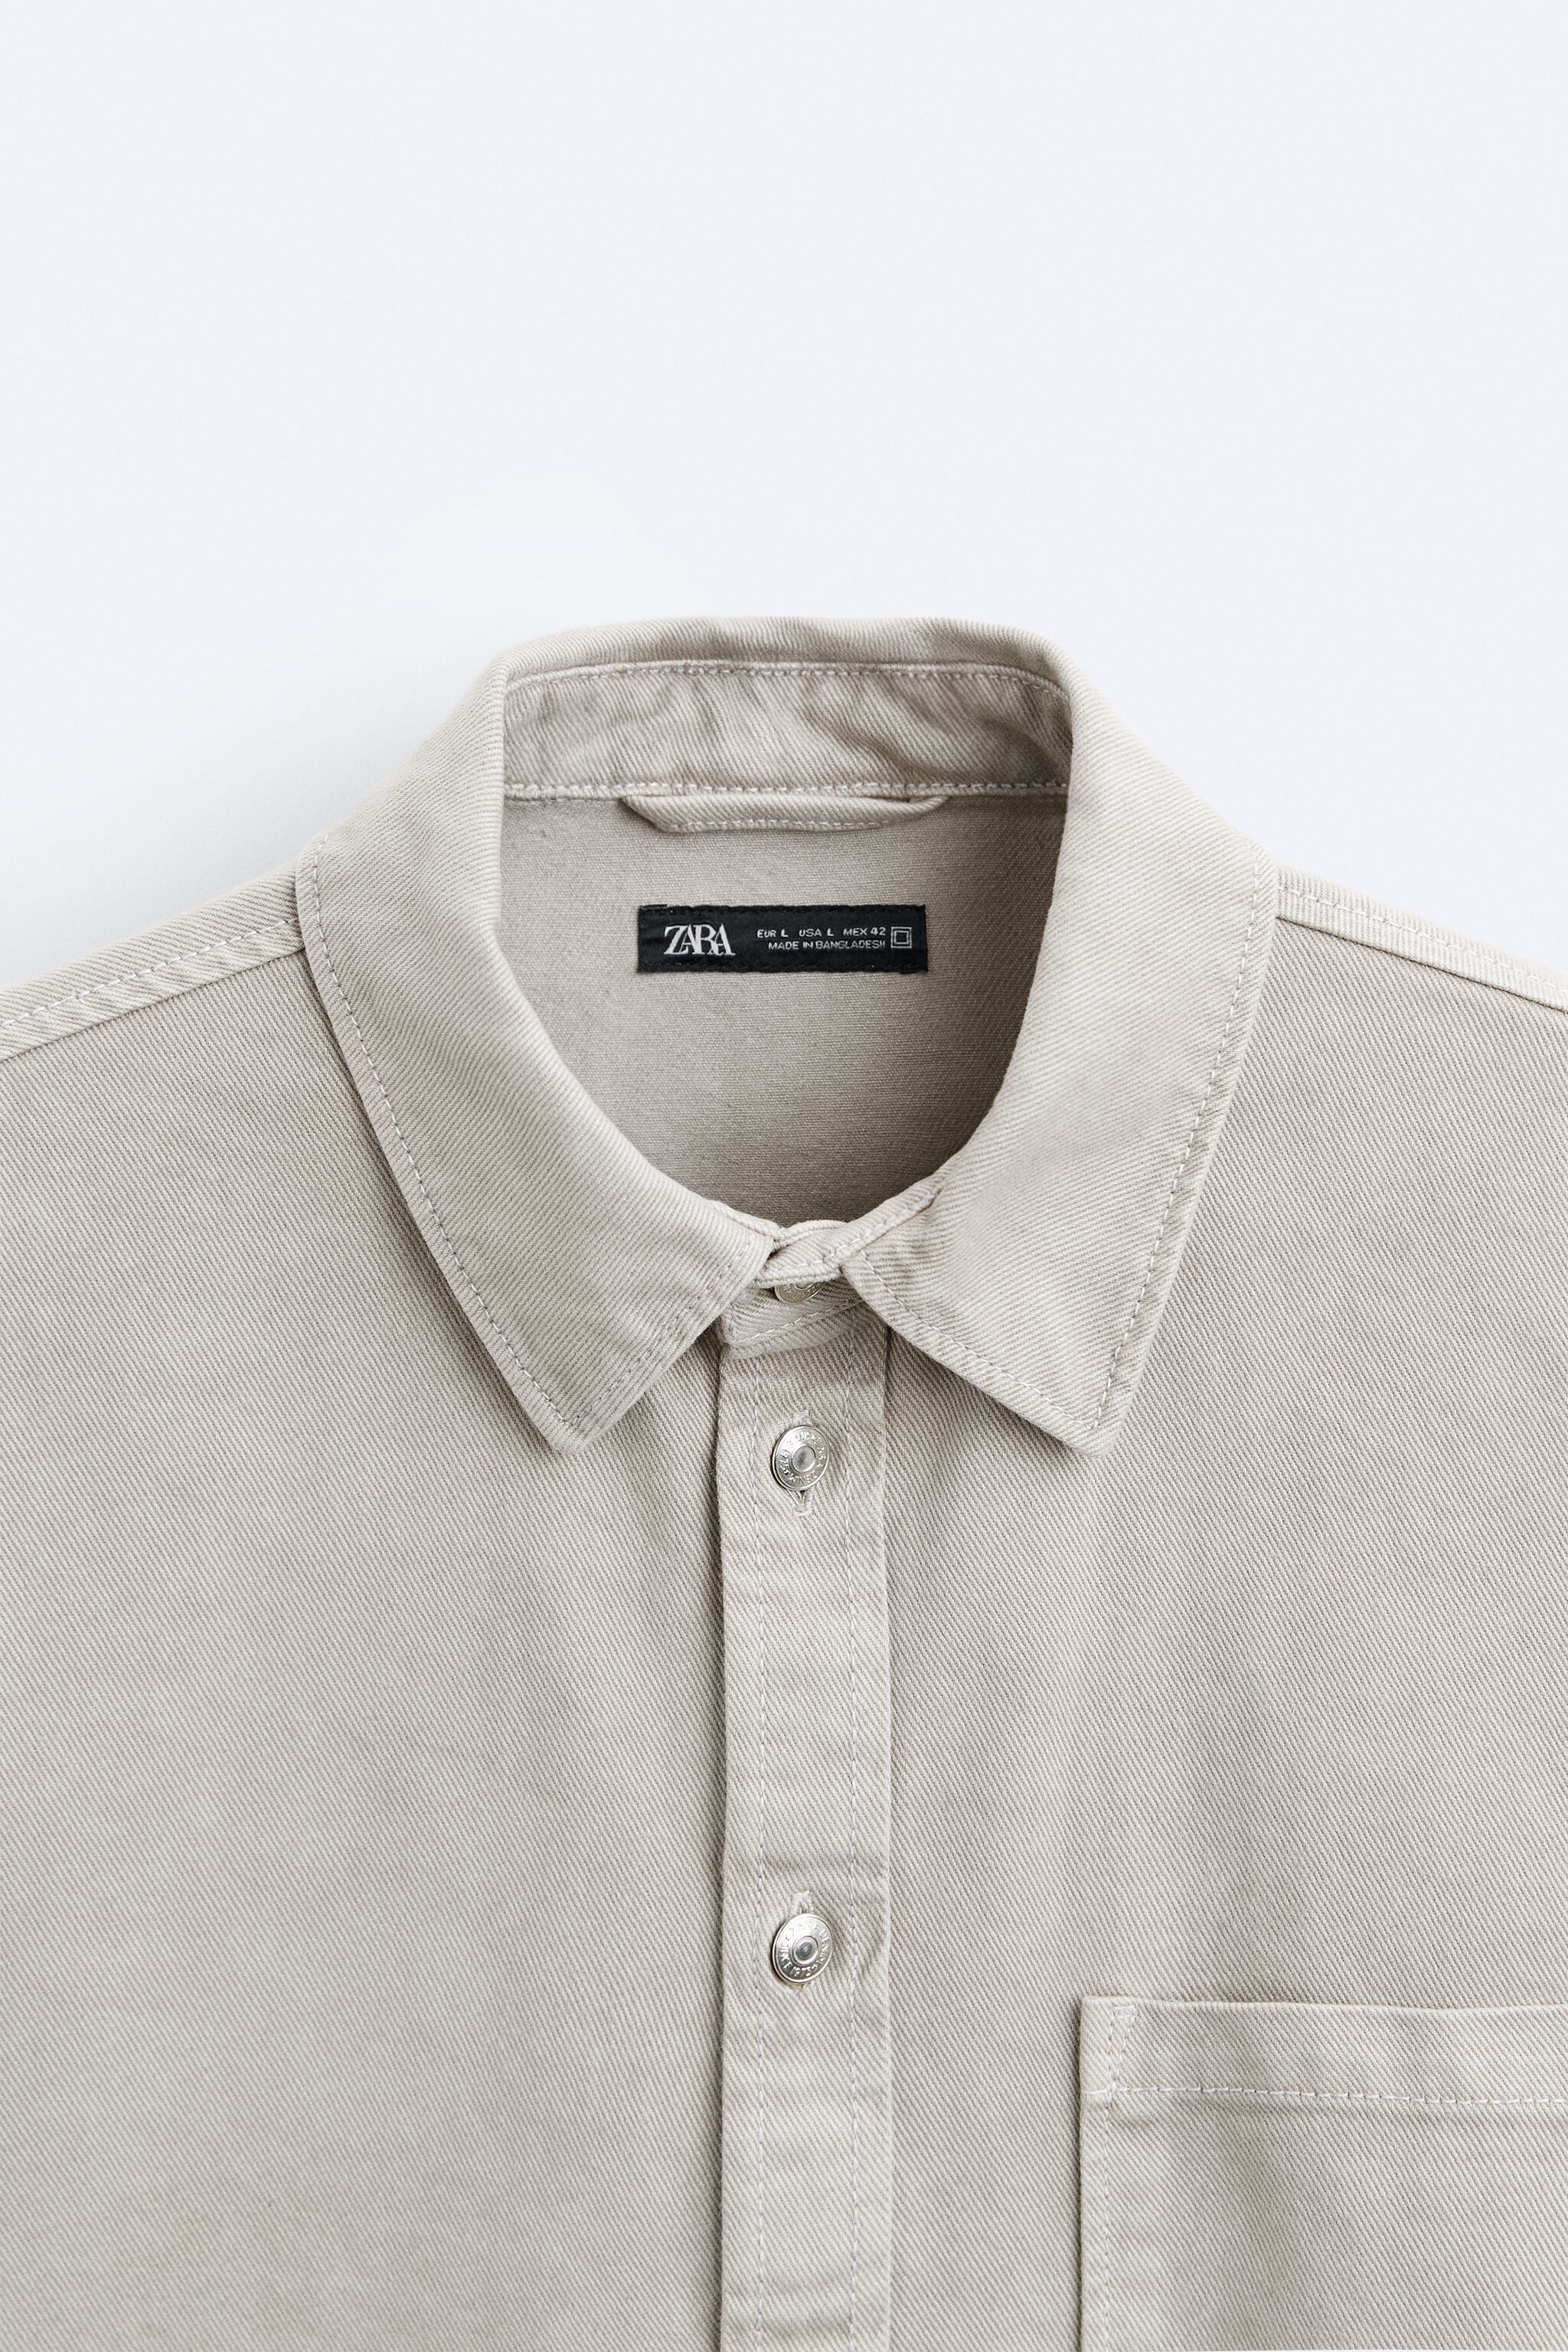 OVERSHIRT WITH CONTRASTING TOPSTITCHING